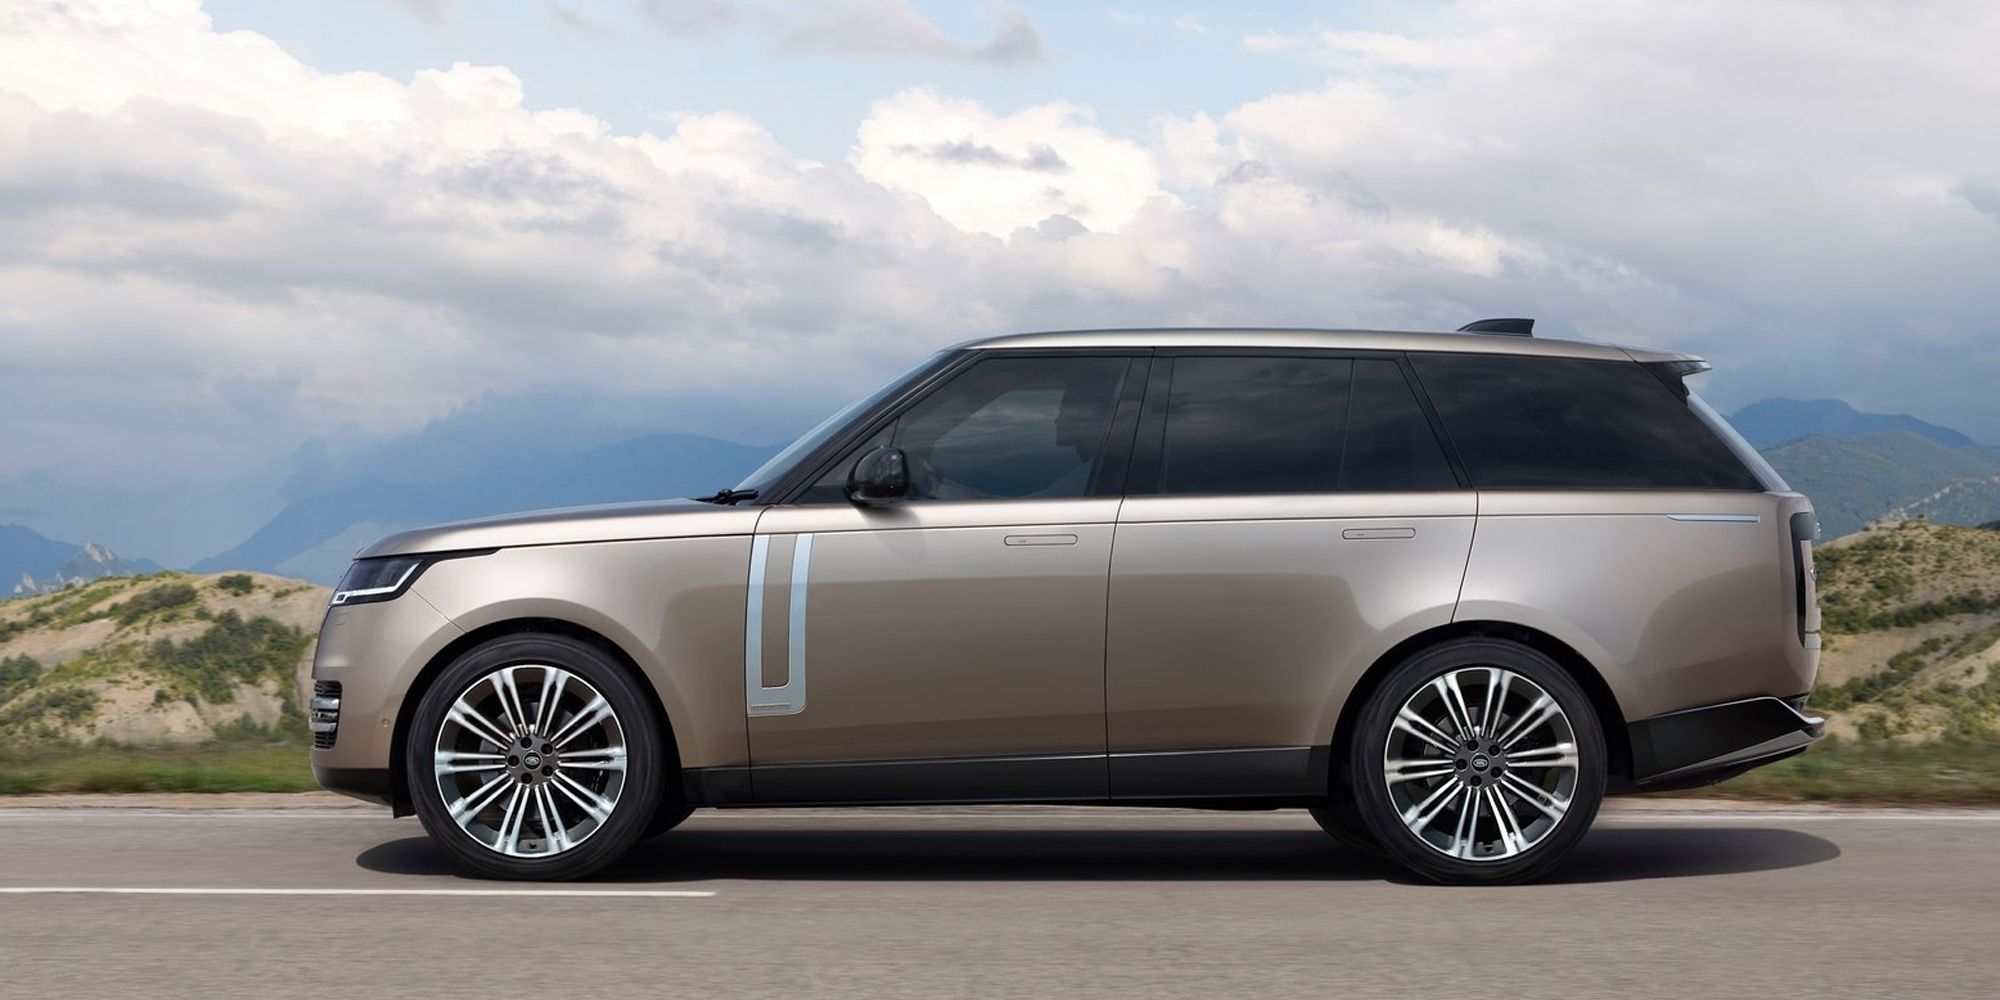 The side of a gold Range Rover